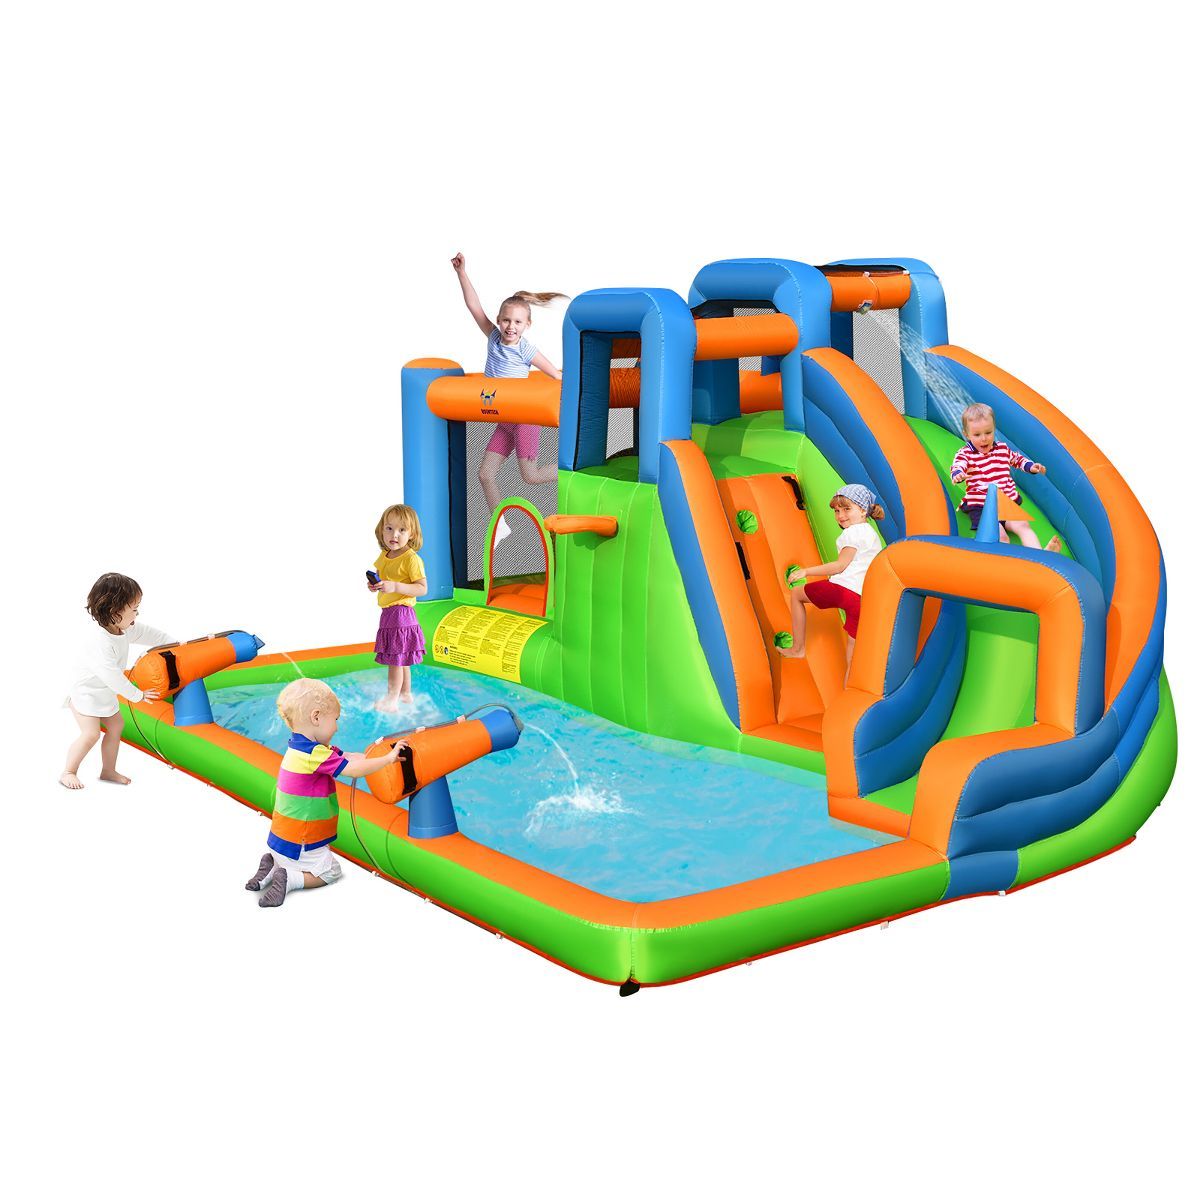 Costway Inflatable Water Slide Giant Bounce Castle w/Dual Climbing Walls Blower Excluded | Target